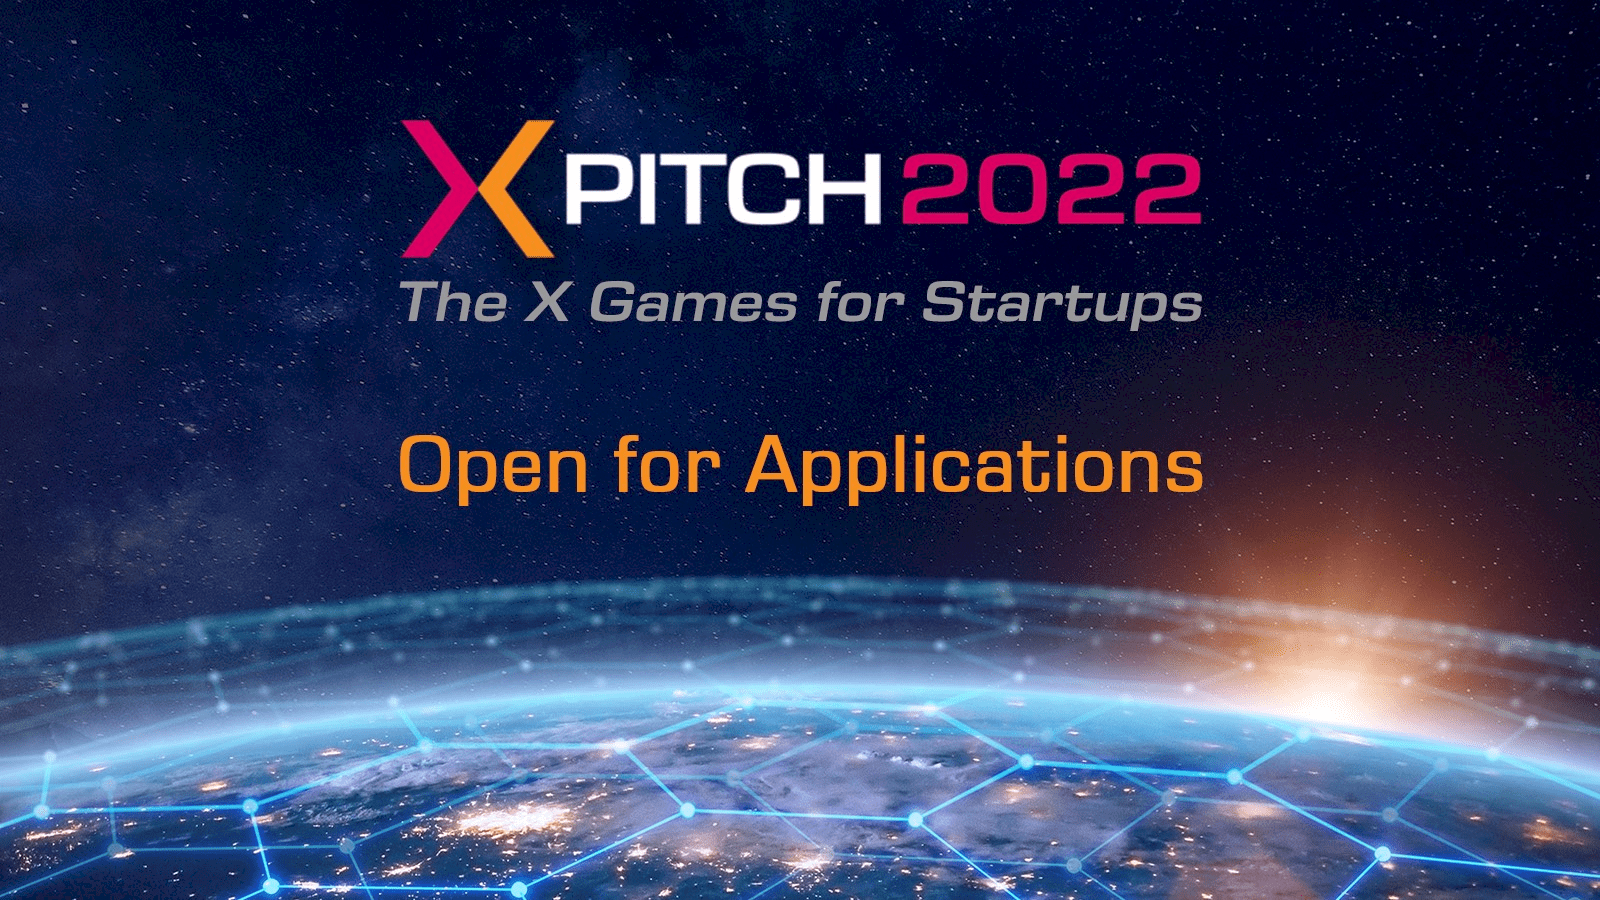 X-PITCH 2022 accelerates innovations in Web3, AI, 5G, edge, and next-gen technologies